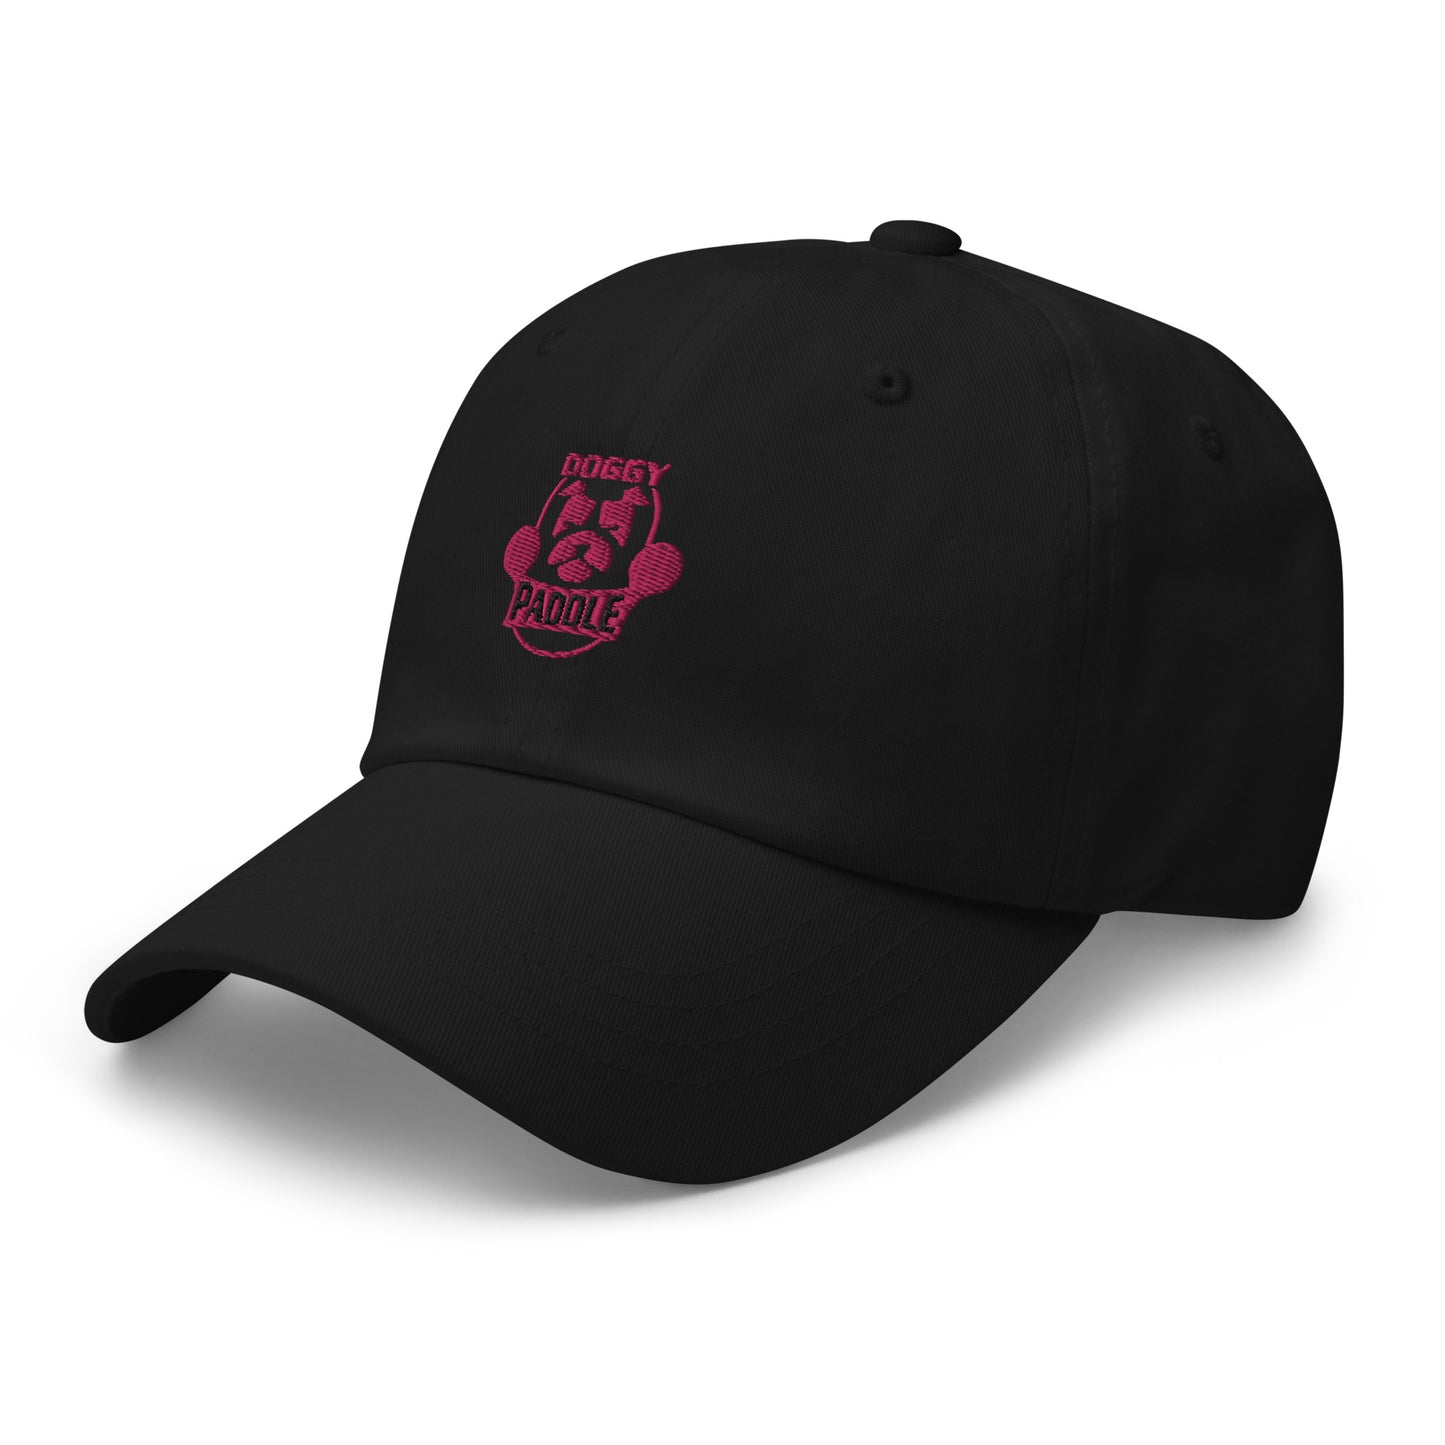 Doggy Paddle Pink Dad Hat